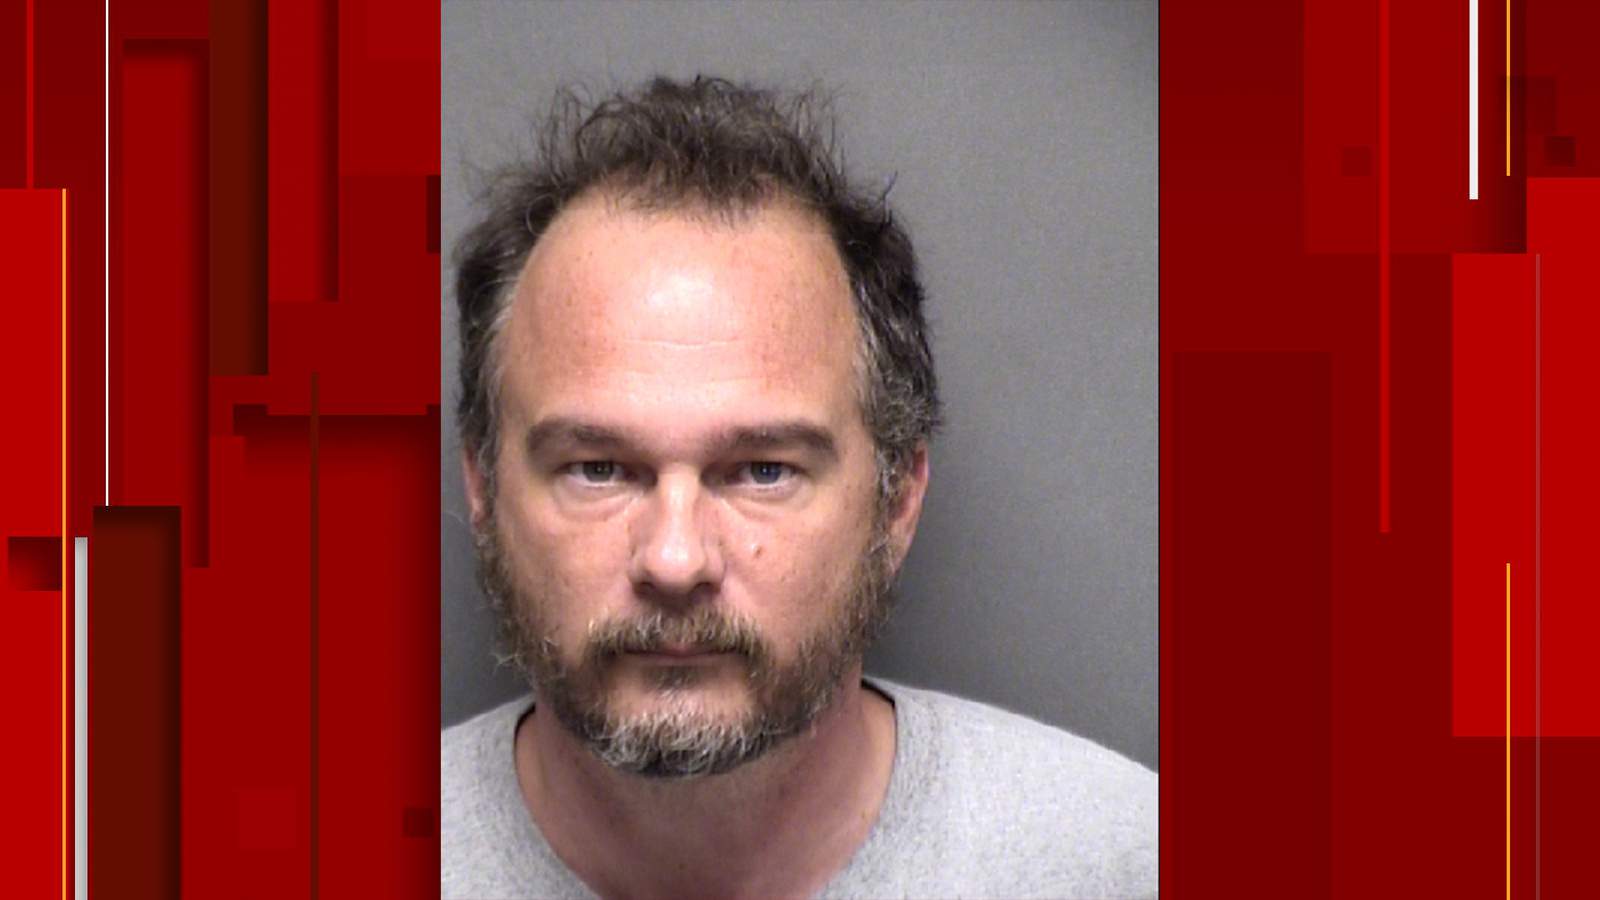 Man accused of sexually assaulting girl, 6, on multiple occasions, police say